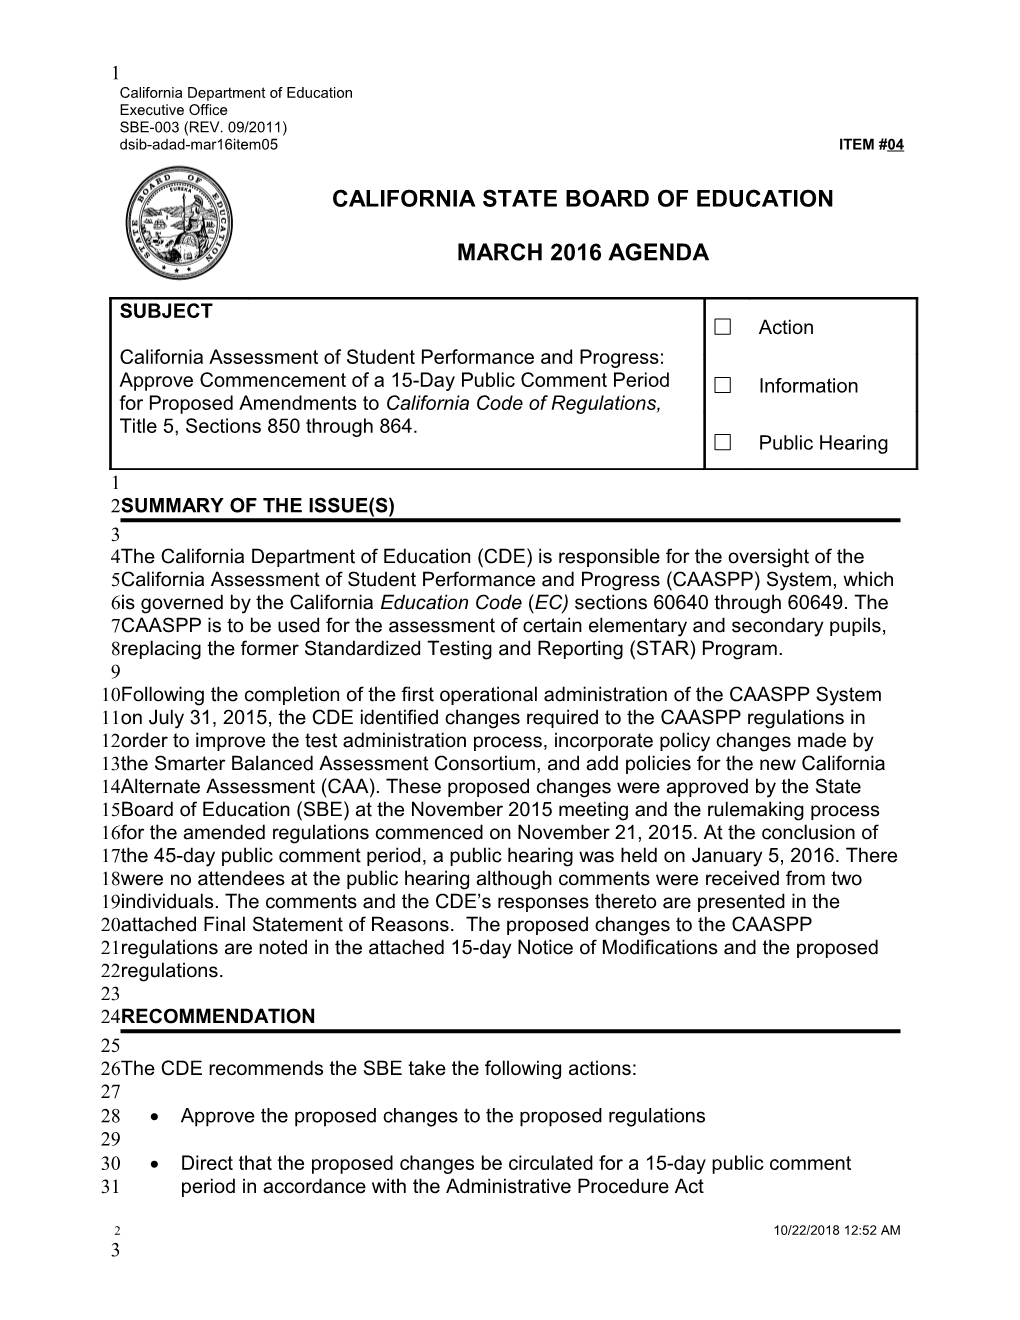 March 2016 Agenda Item 04 - Meeting Agendas (CA State Board of Education)